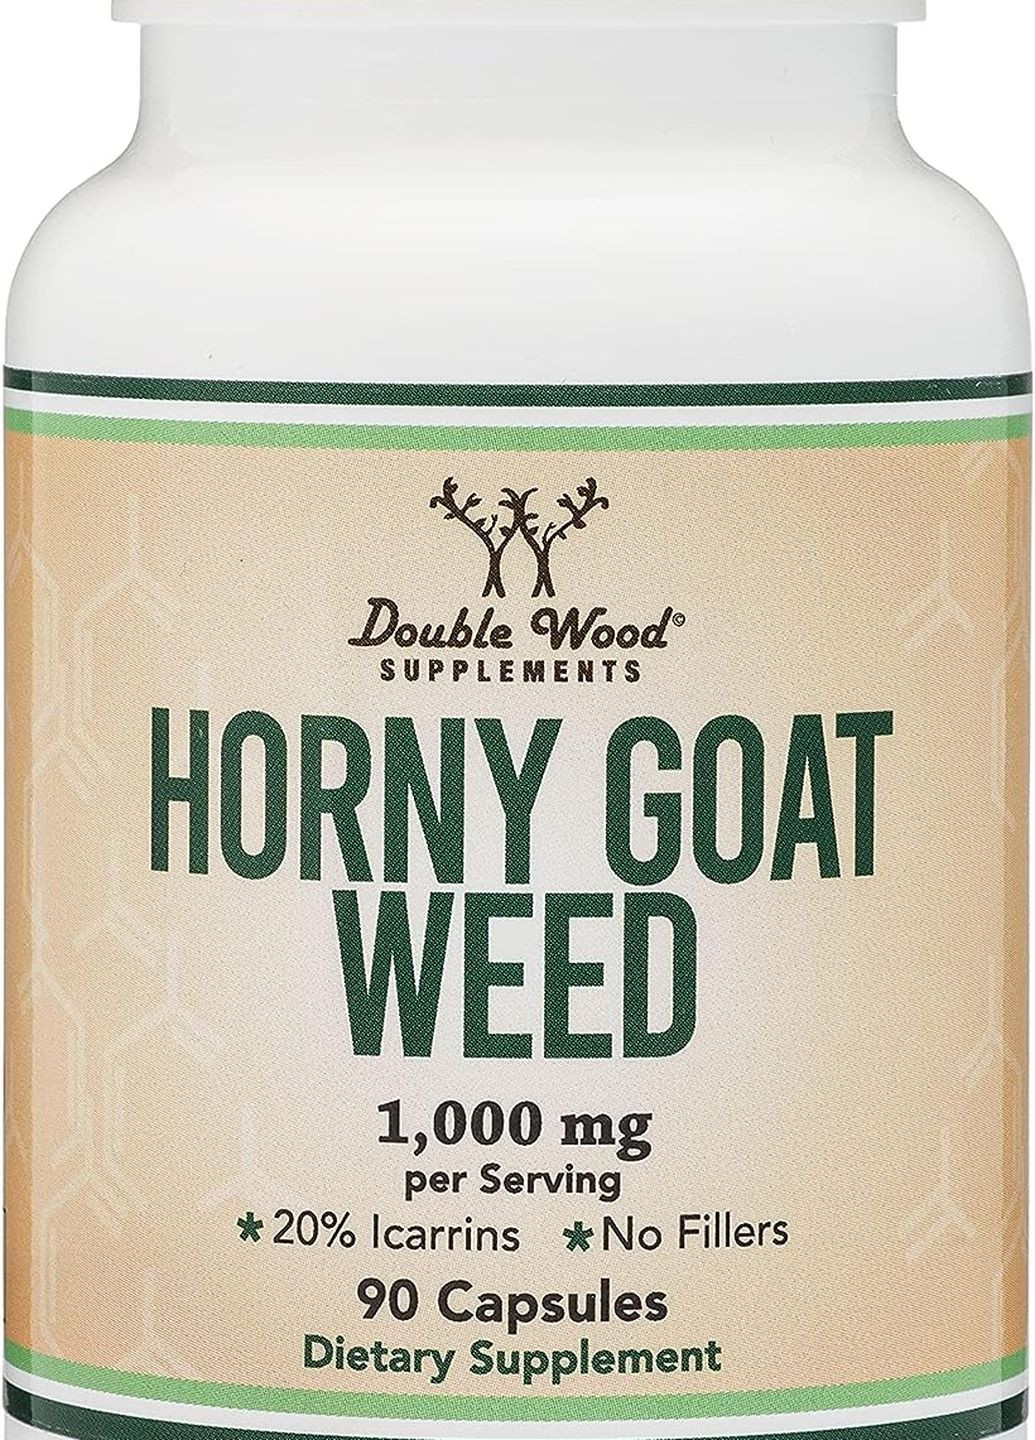 Добавка Double Wood Horny Goat Weed 1000 mg 90capsules Double Wood Supplements (261765758)